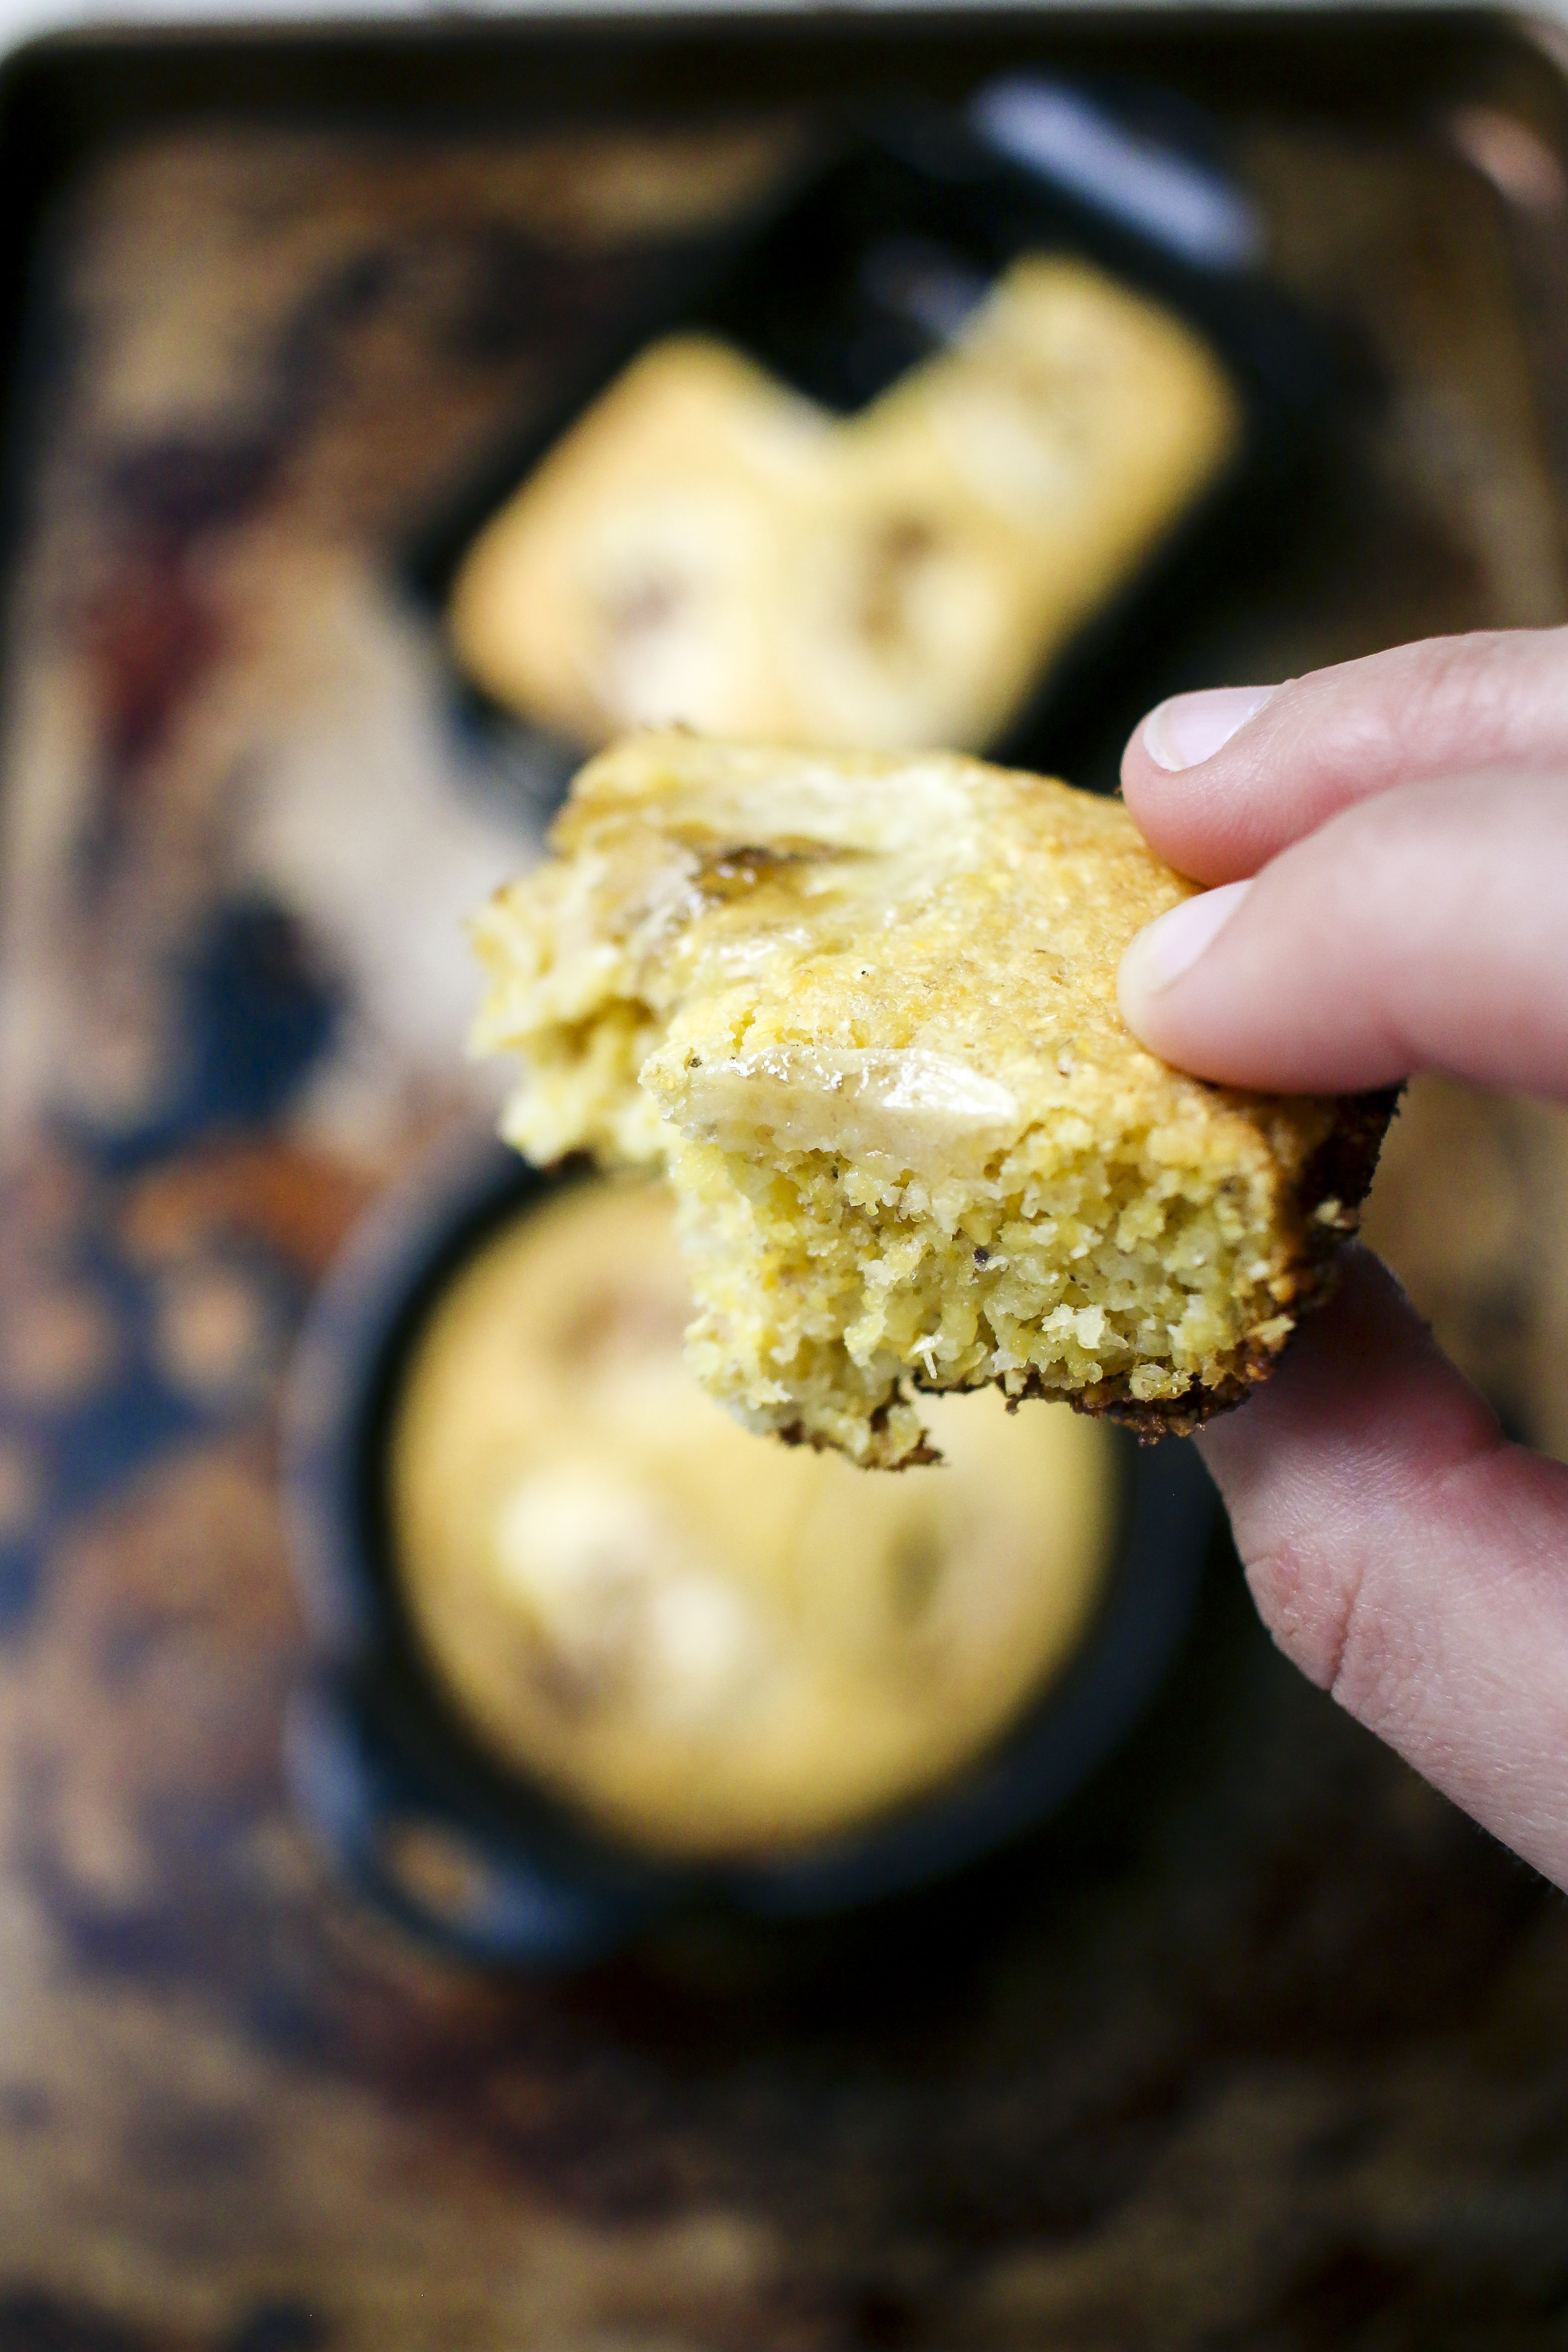 Banana Bacon Fat Cornbread - A sweet twist on a southern classic | I Will Not Eat Oysters